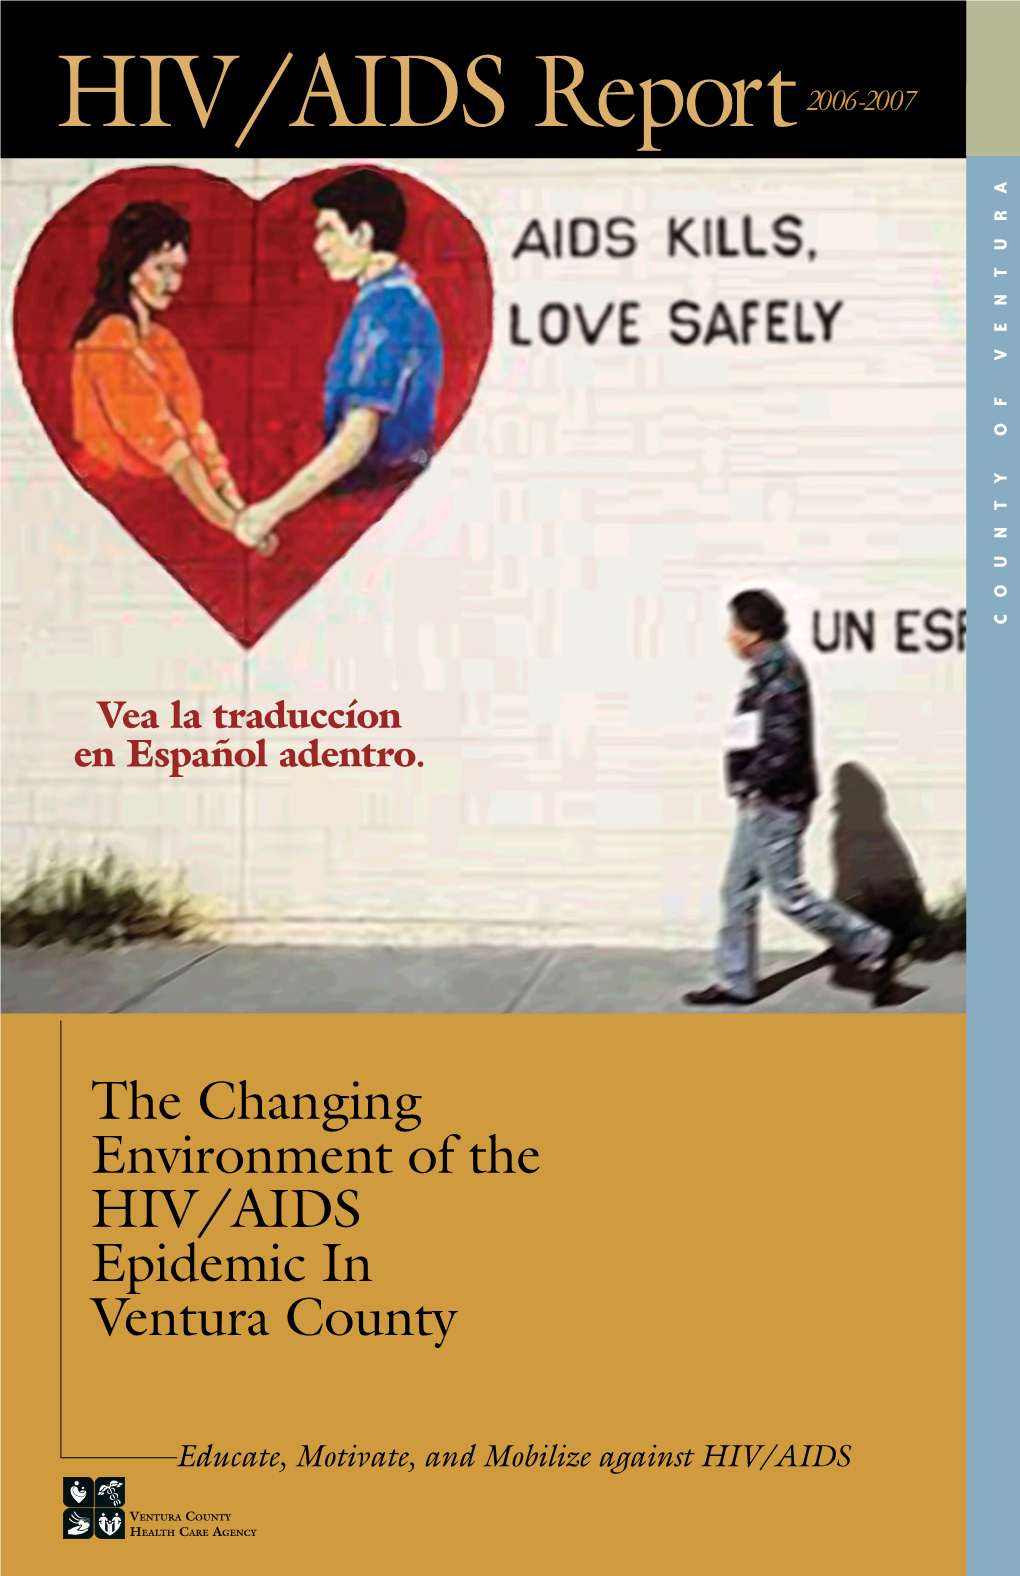 The Changing Environment of the HIV/AIDS Epidemic in Ventura County